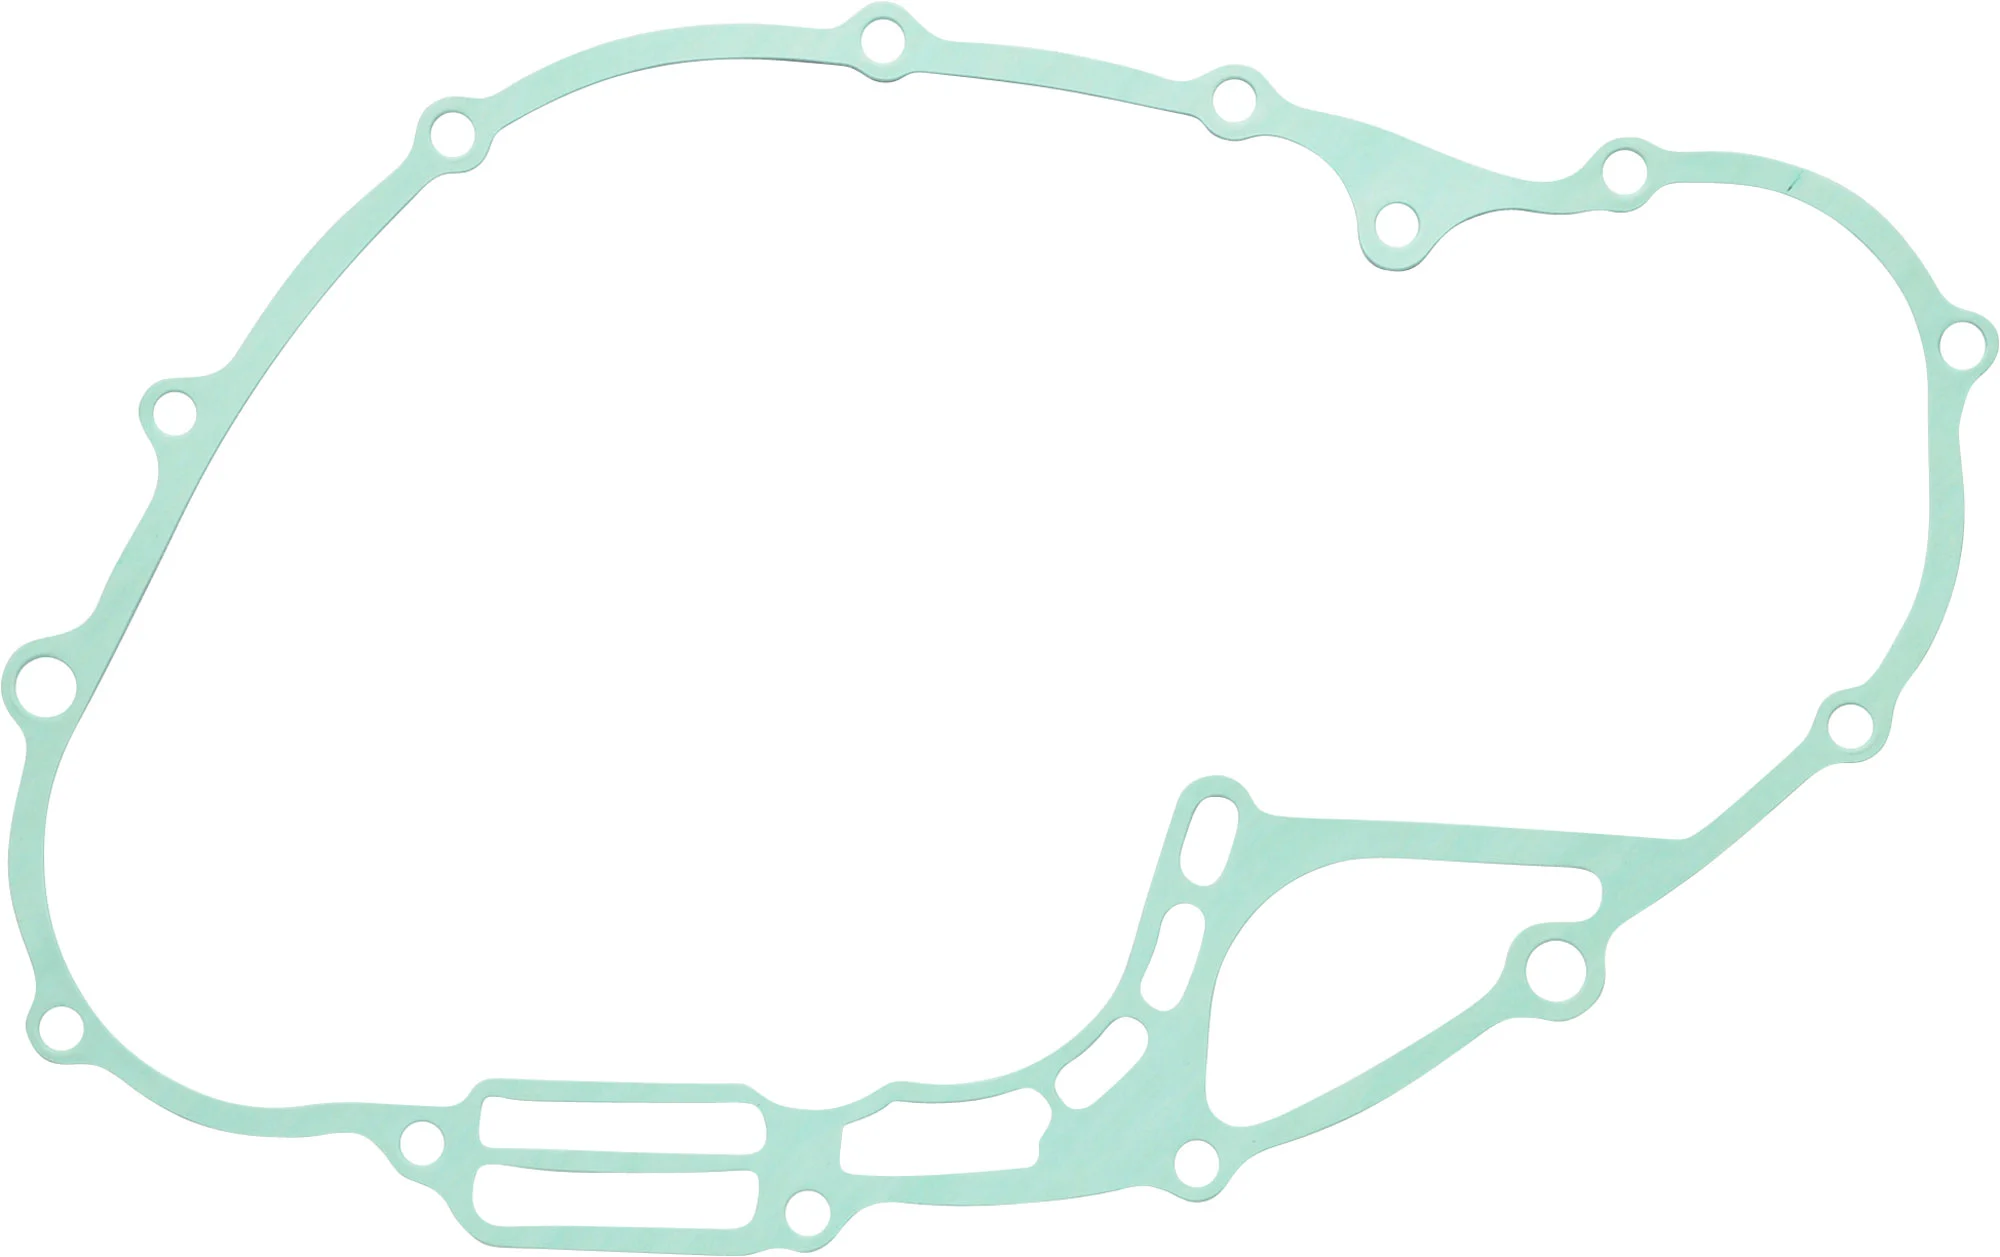 CLUTCH COVER GASKET